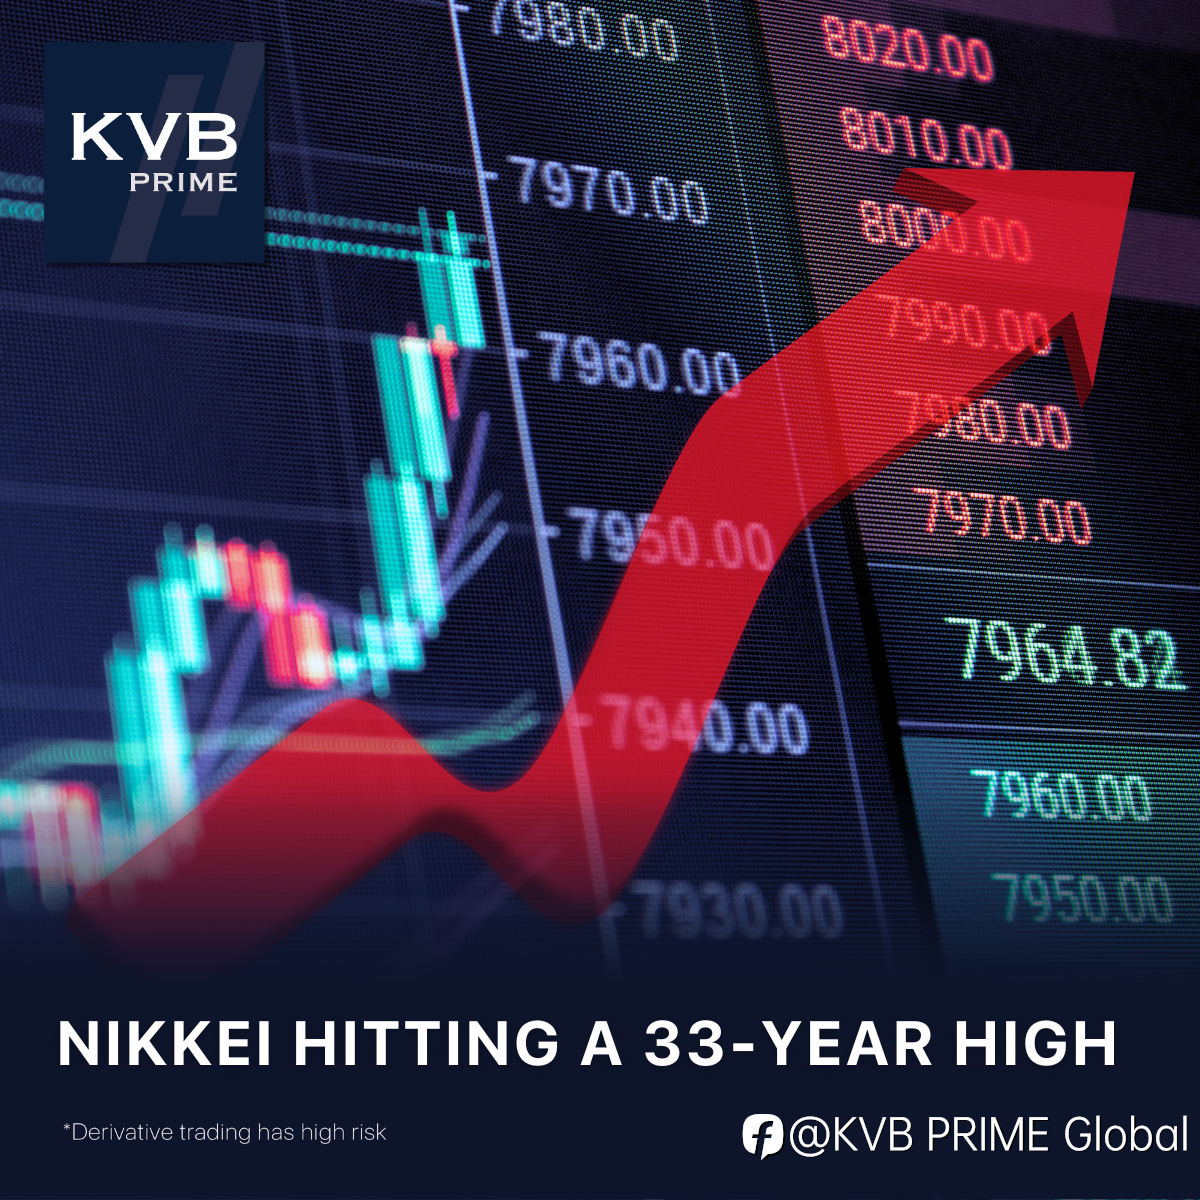 Asian stocks surged as optimism over the debt ceiling boosted investor sentiment, with the Nikkei hitting a 33-year high.